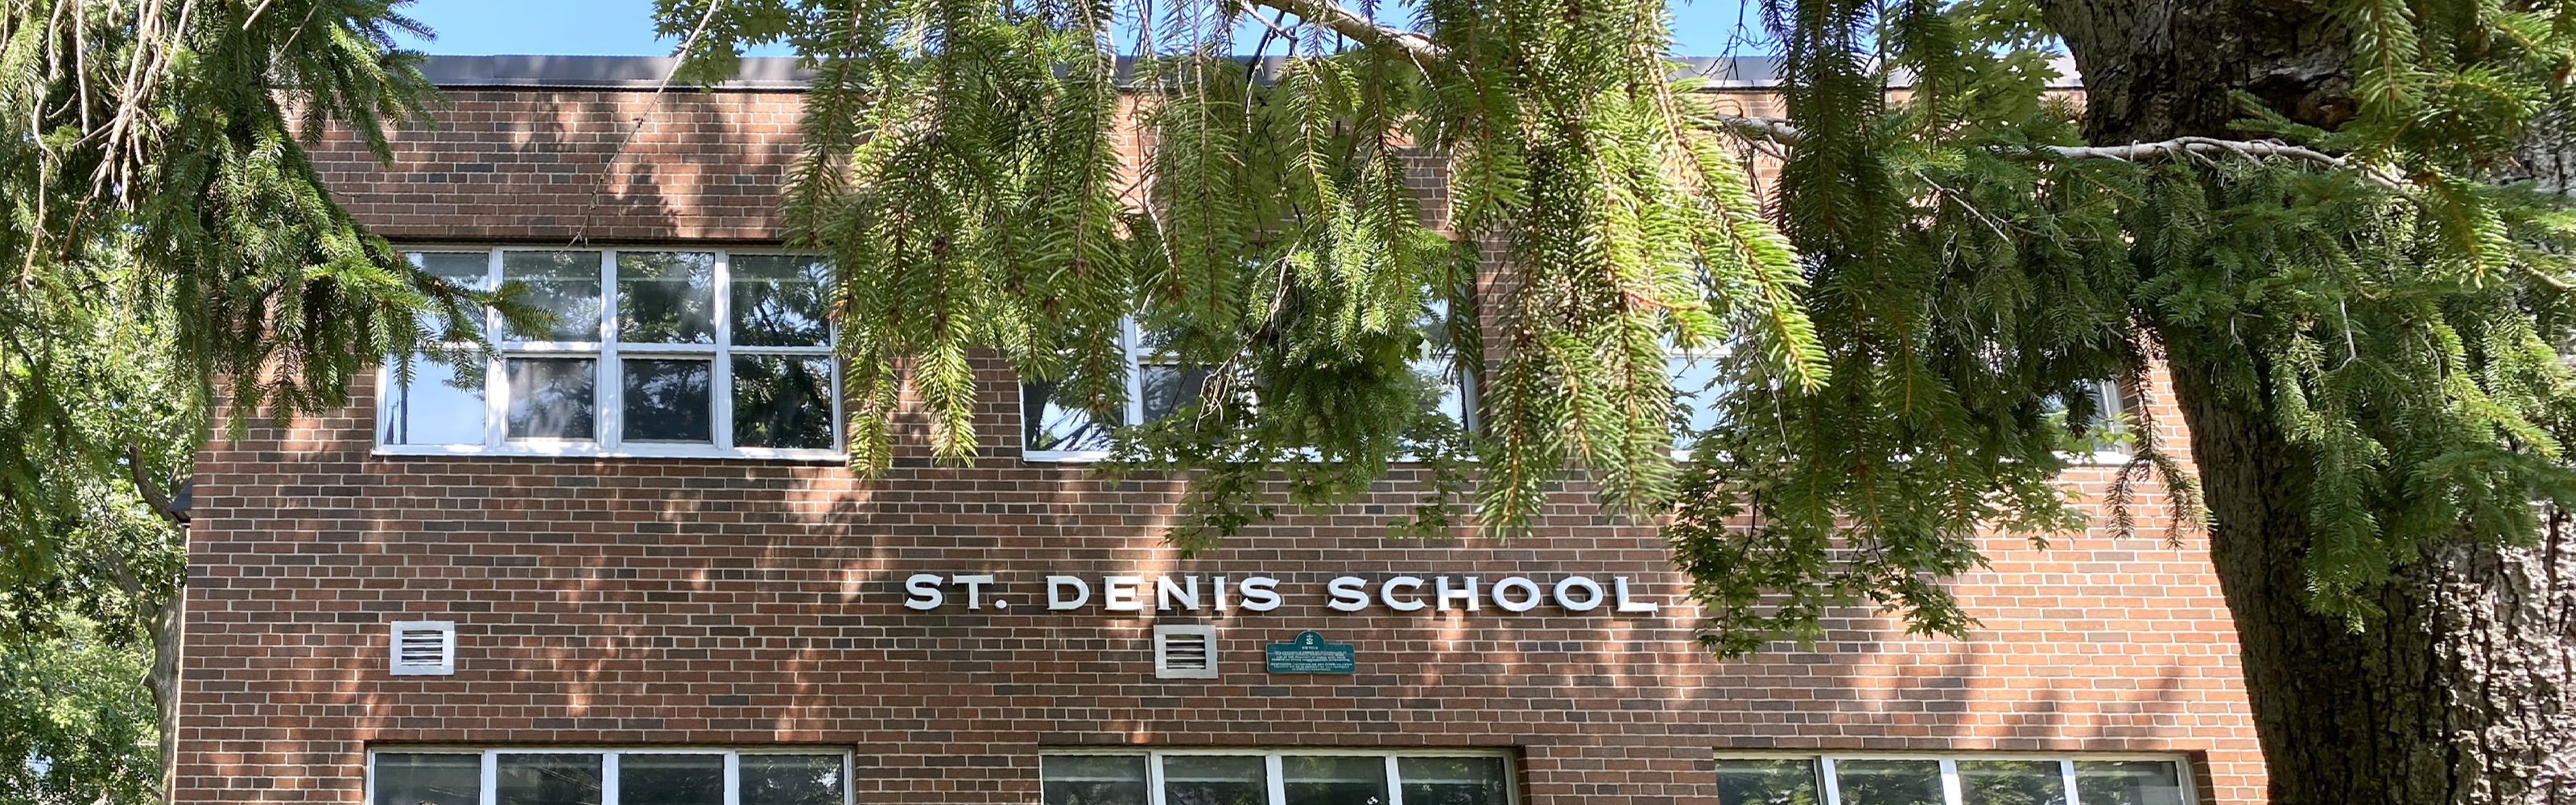 The front of the St. Denis Catholic School building.